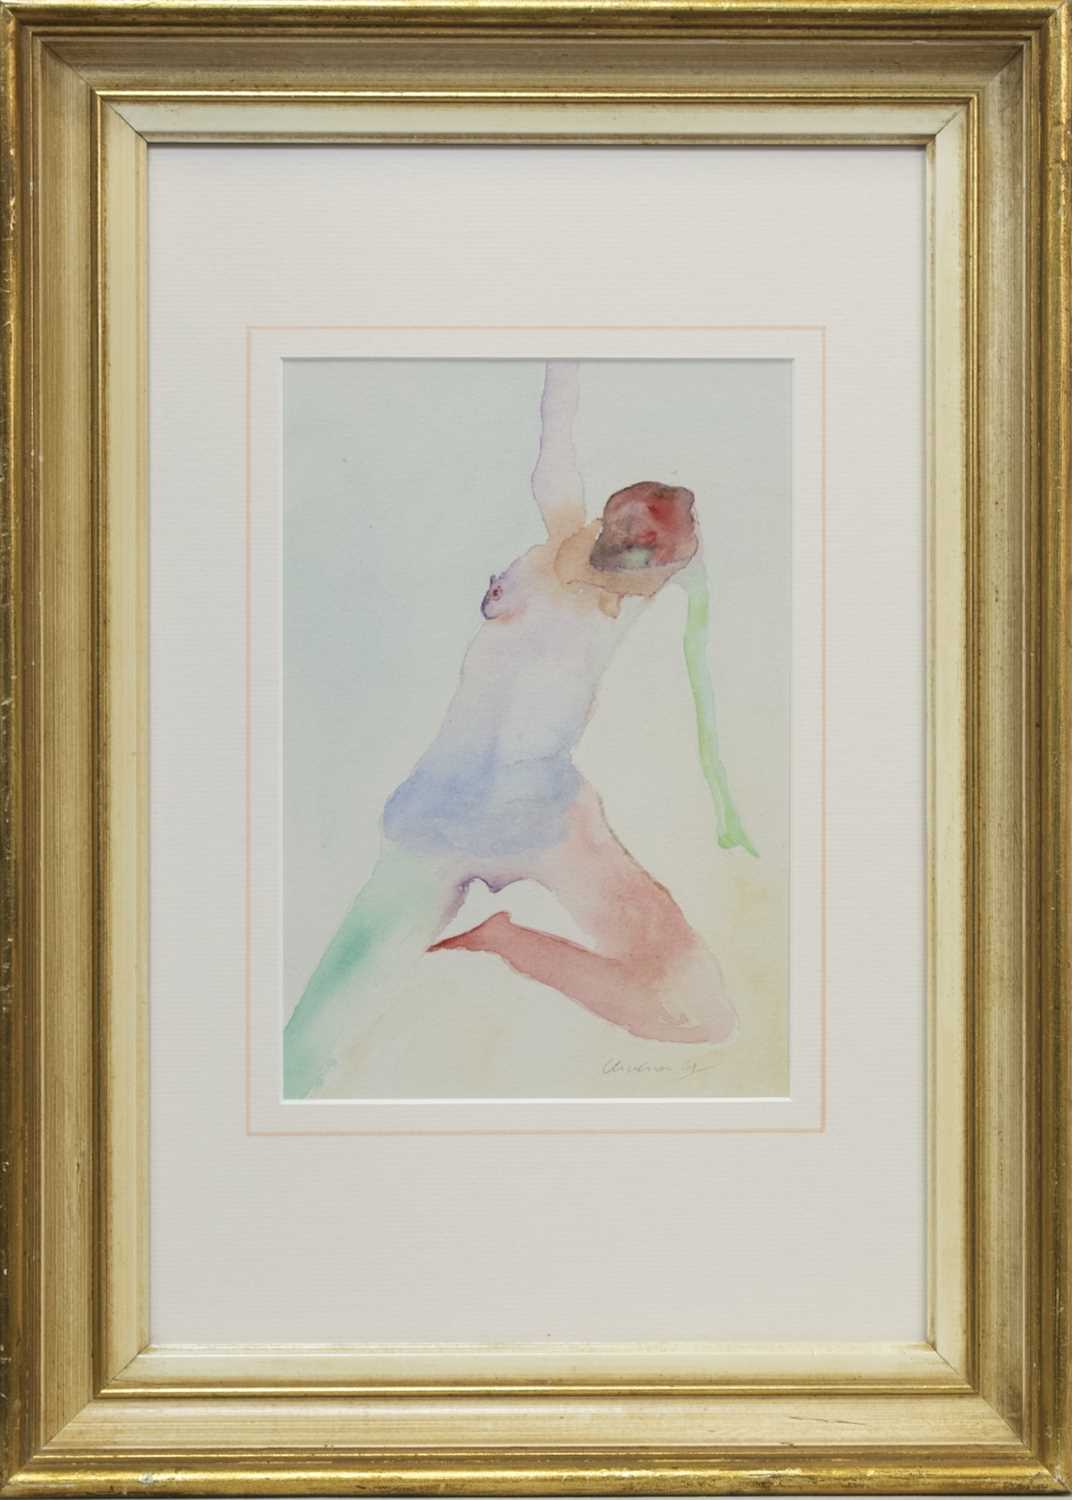 Lot 590 - UNTITLED 1961, A WATERCOLOUR BY NATHAN OLIVEIRA